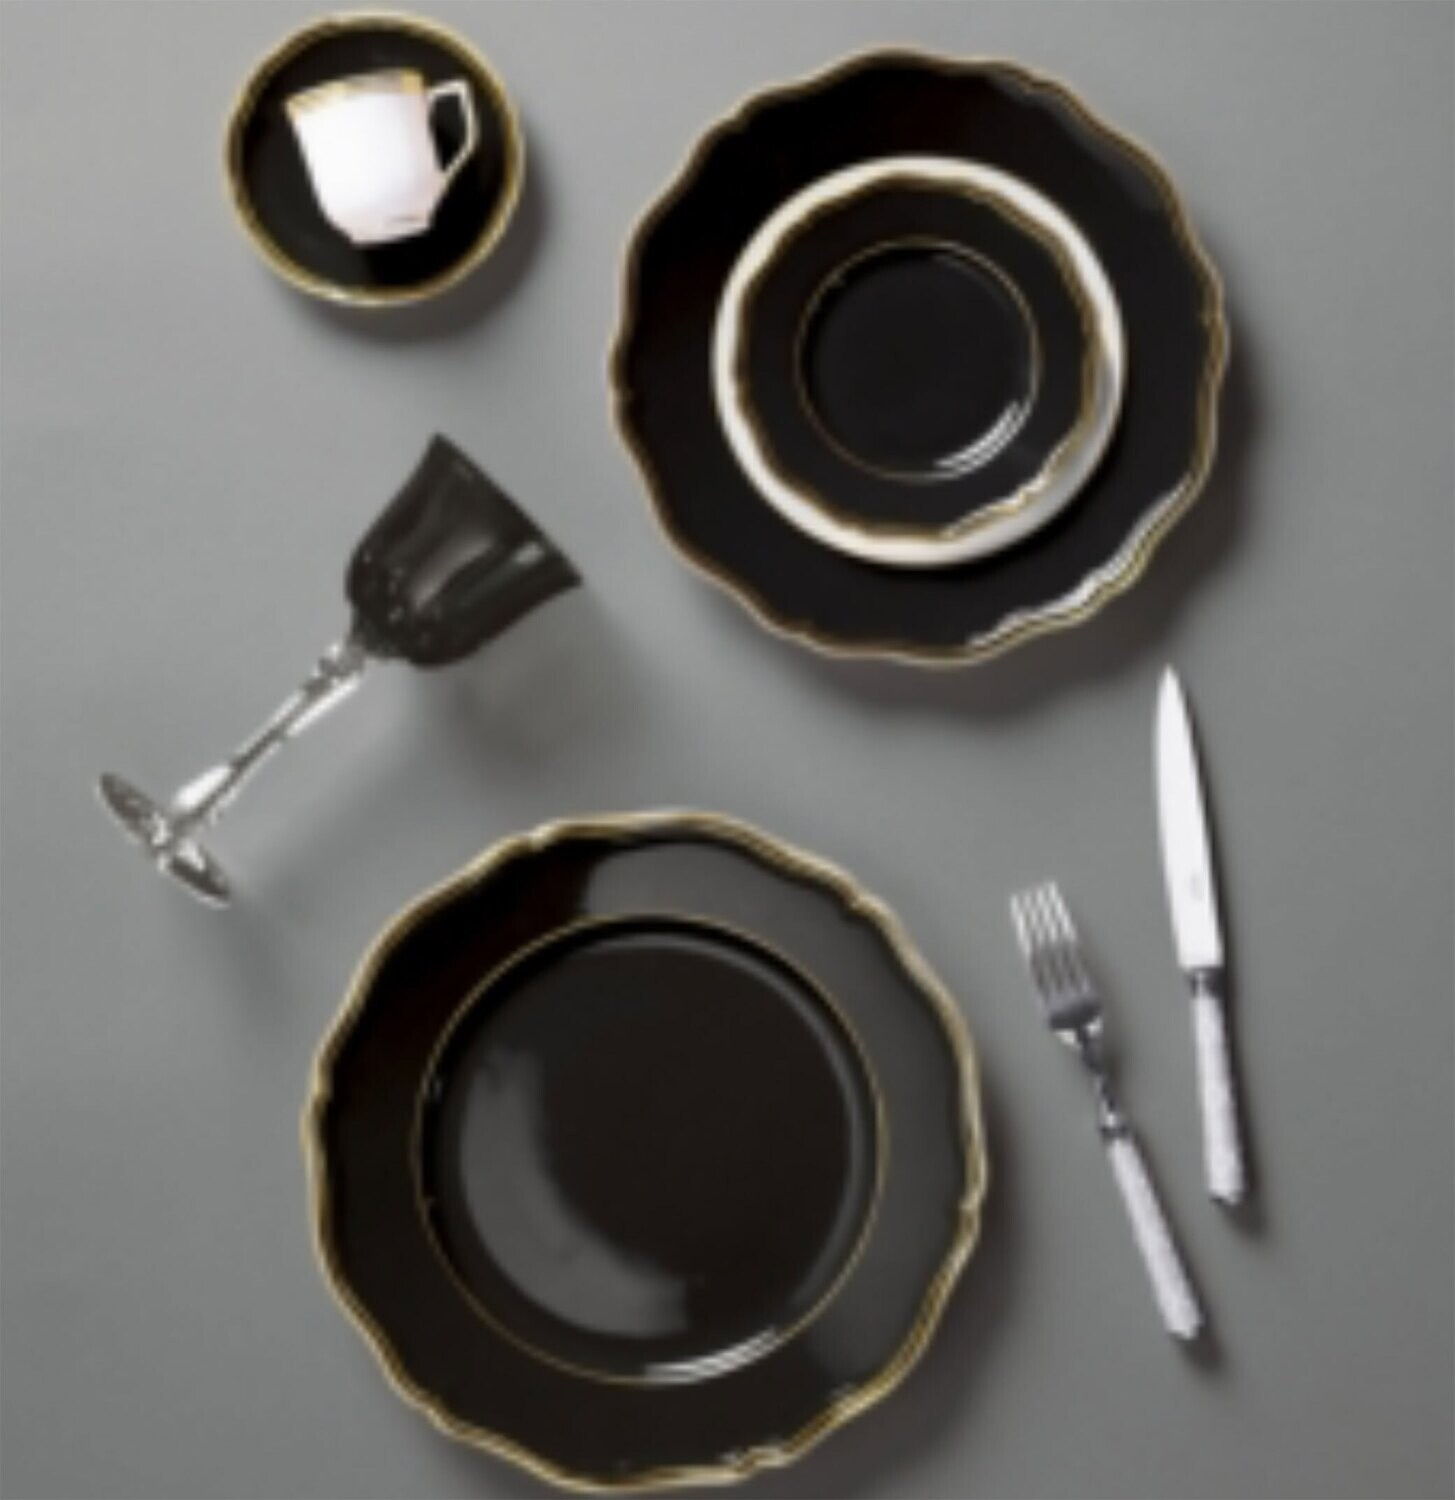 Raynaud Limoges Mazurka Or Black Petit four stand 10.6 in 0868-01-515027